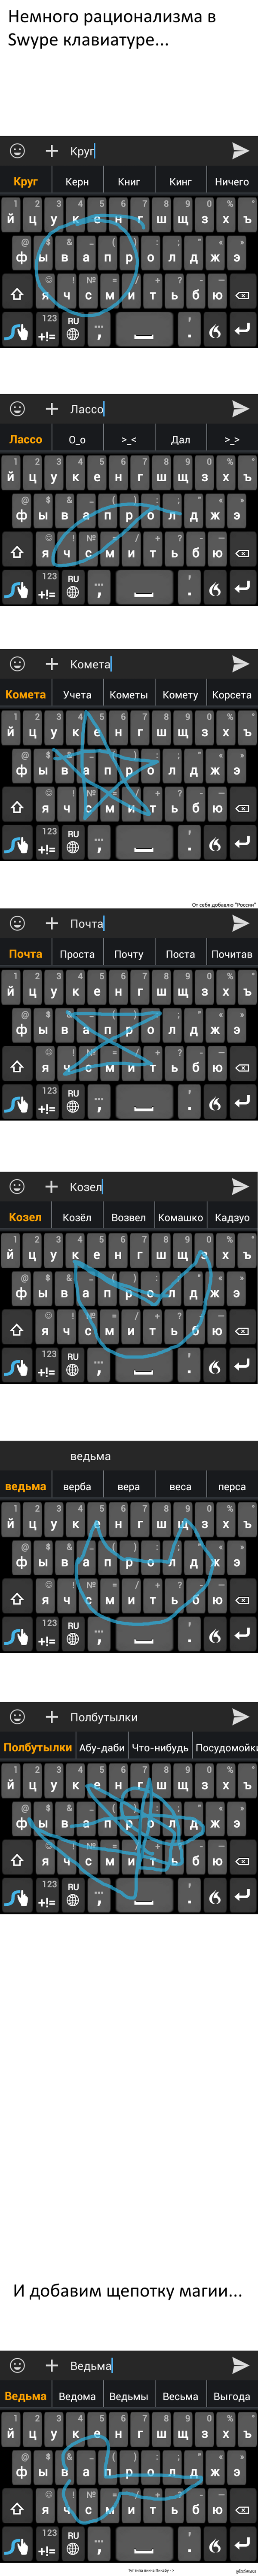    Swype  swype 3.26.92D.37604.t0.7213